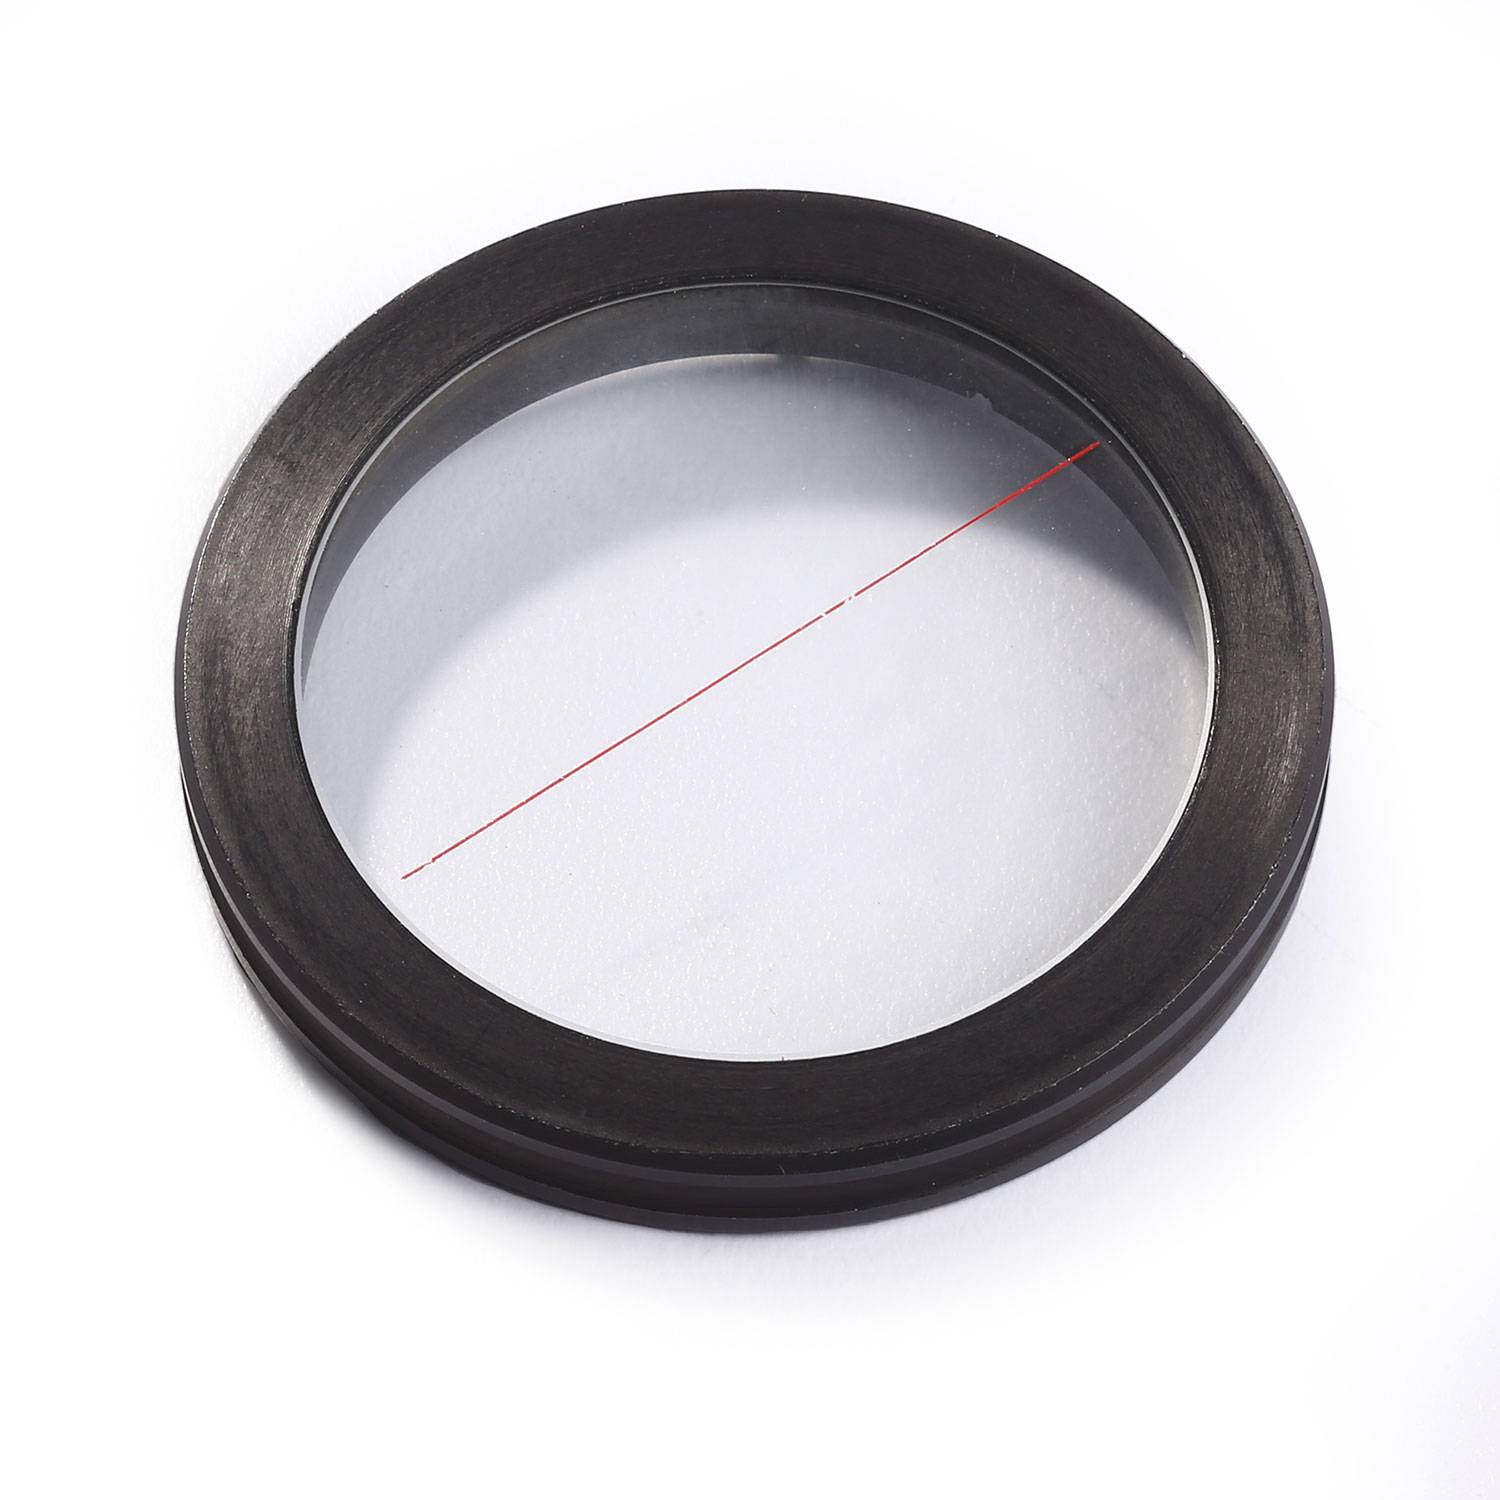 Sirchie Henry Disc for the PFP100 and PFP200 Magnifiers